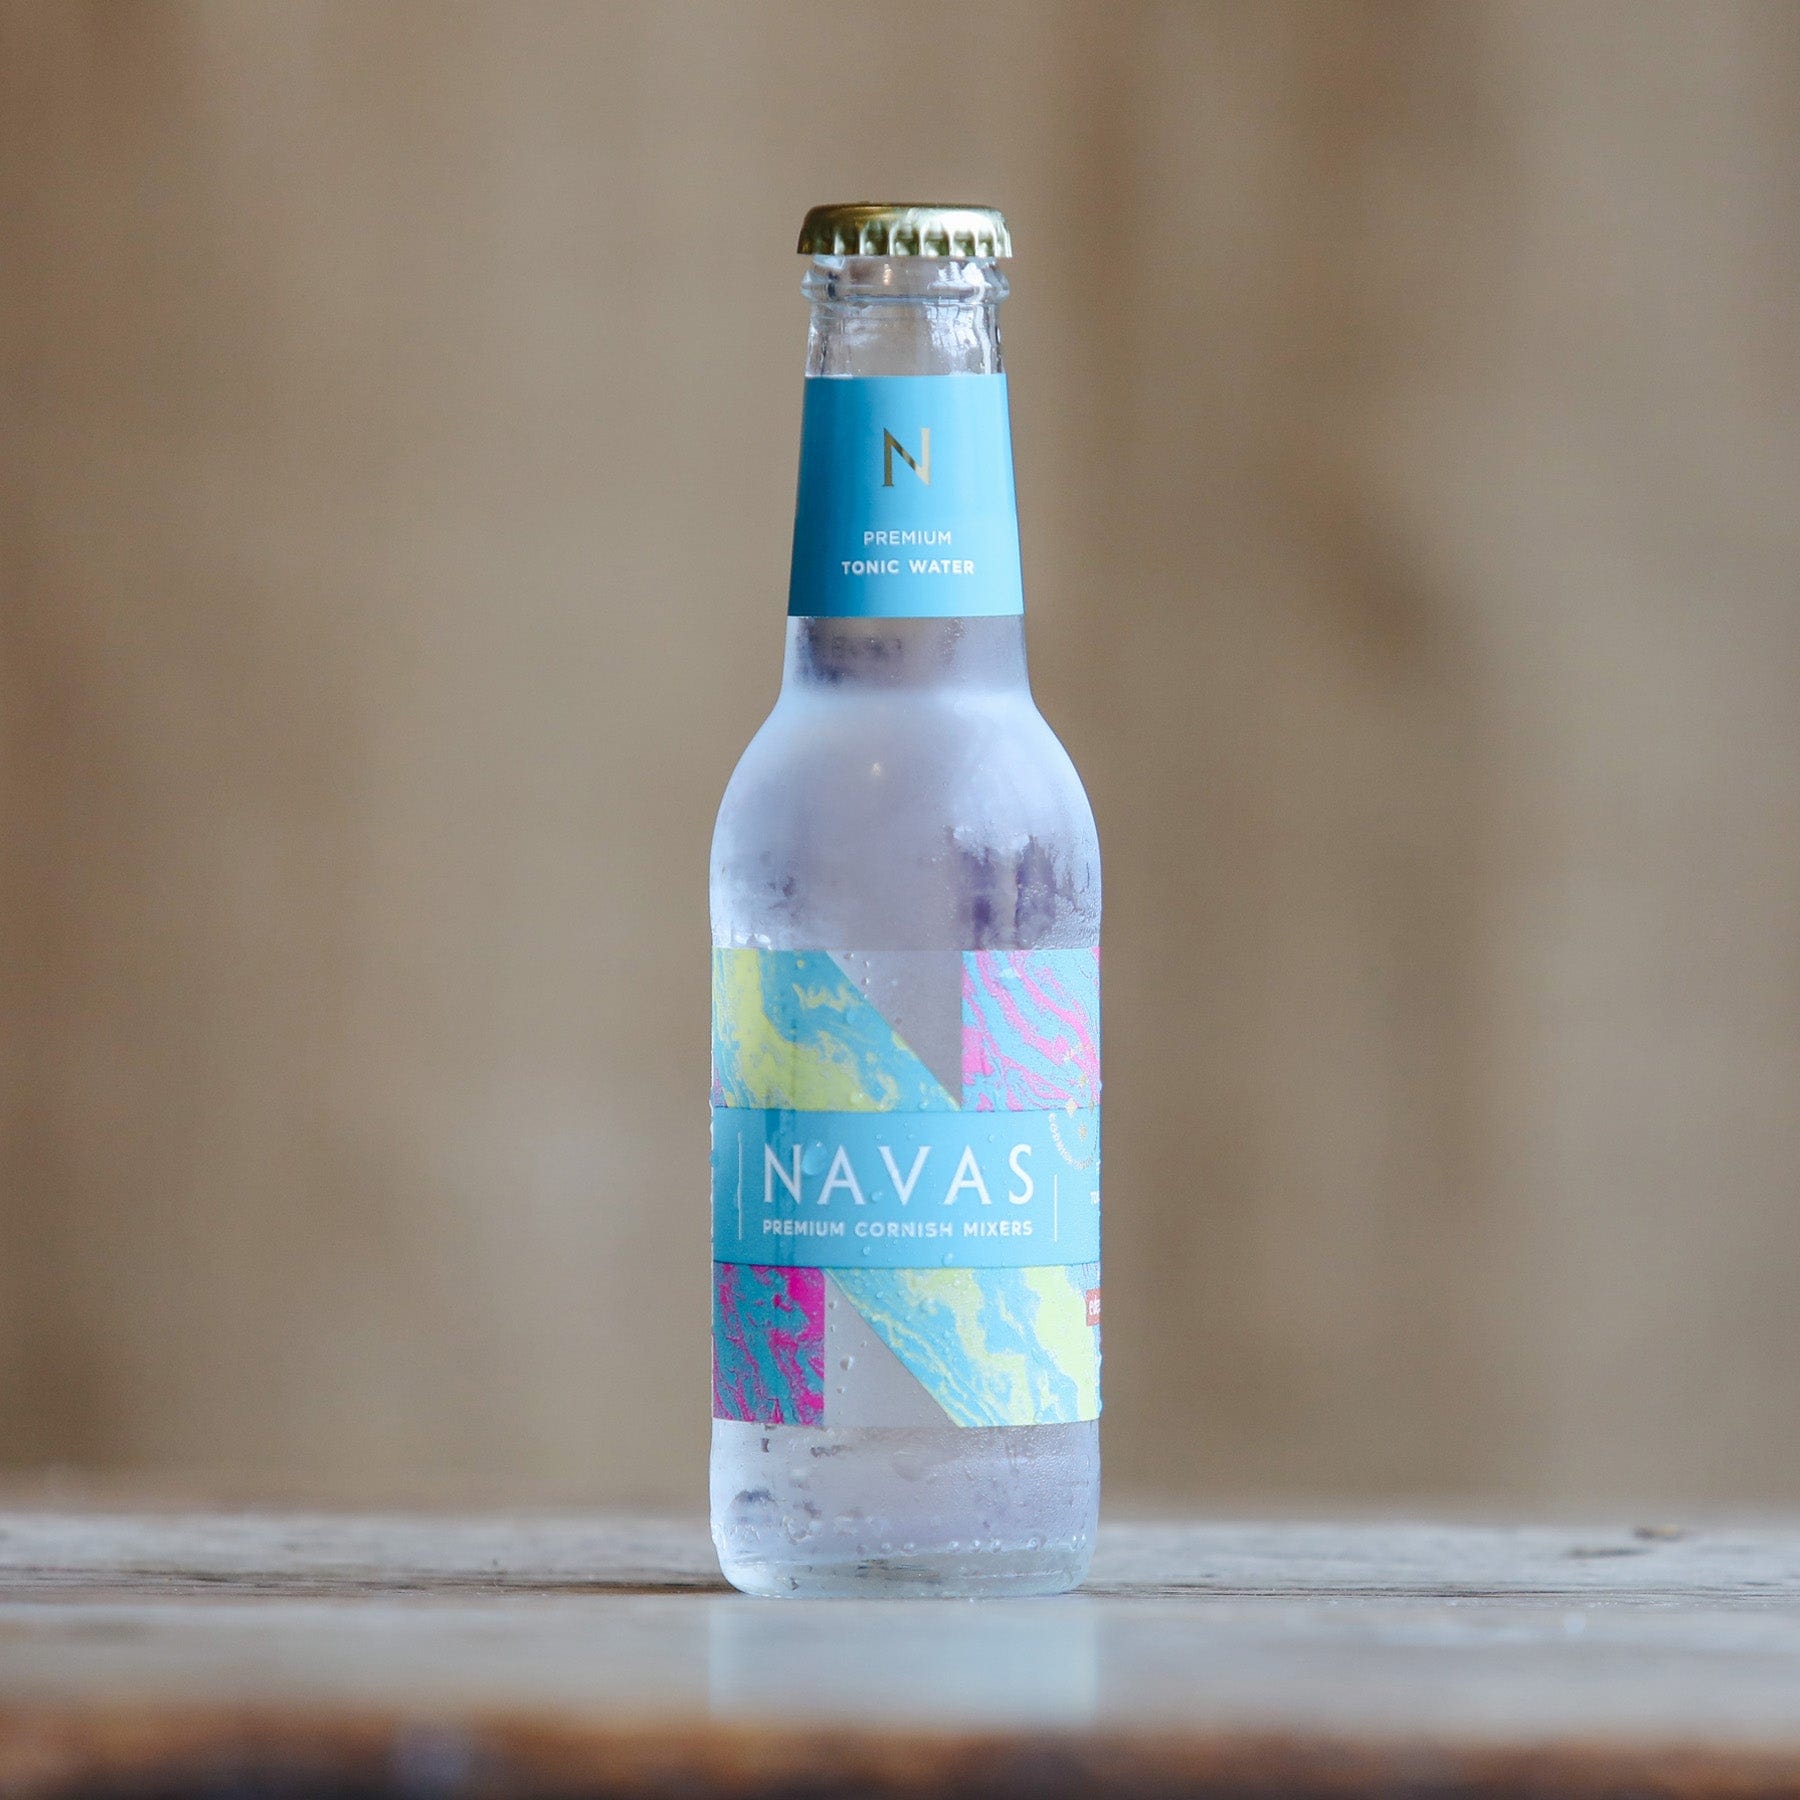 Condensation-covered Navas premium tonic water bottle on wooden surface with colorful label design, beverage product photography, focused and well-lit with soft background